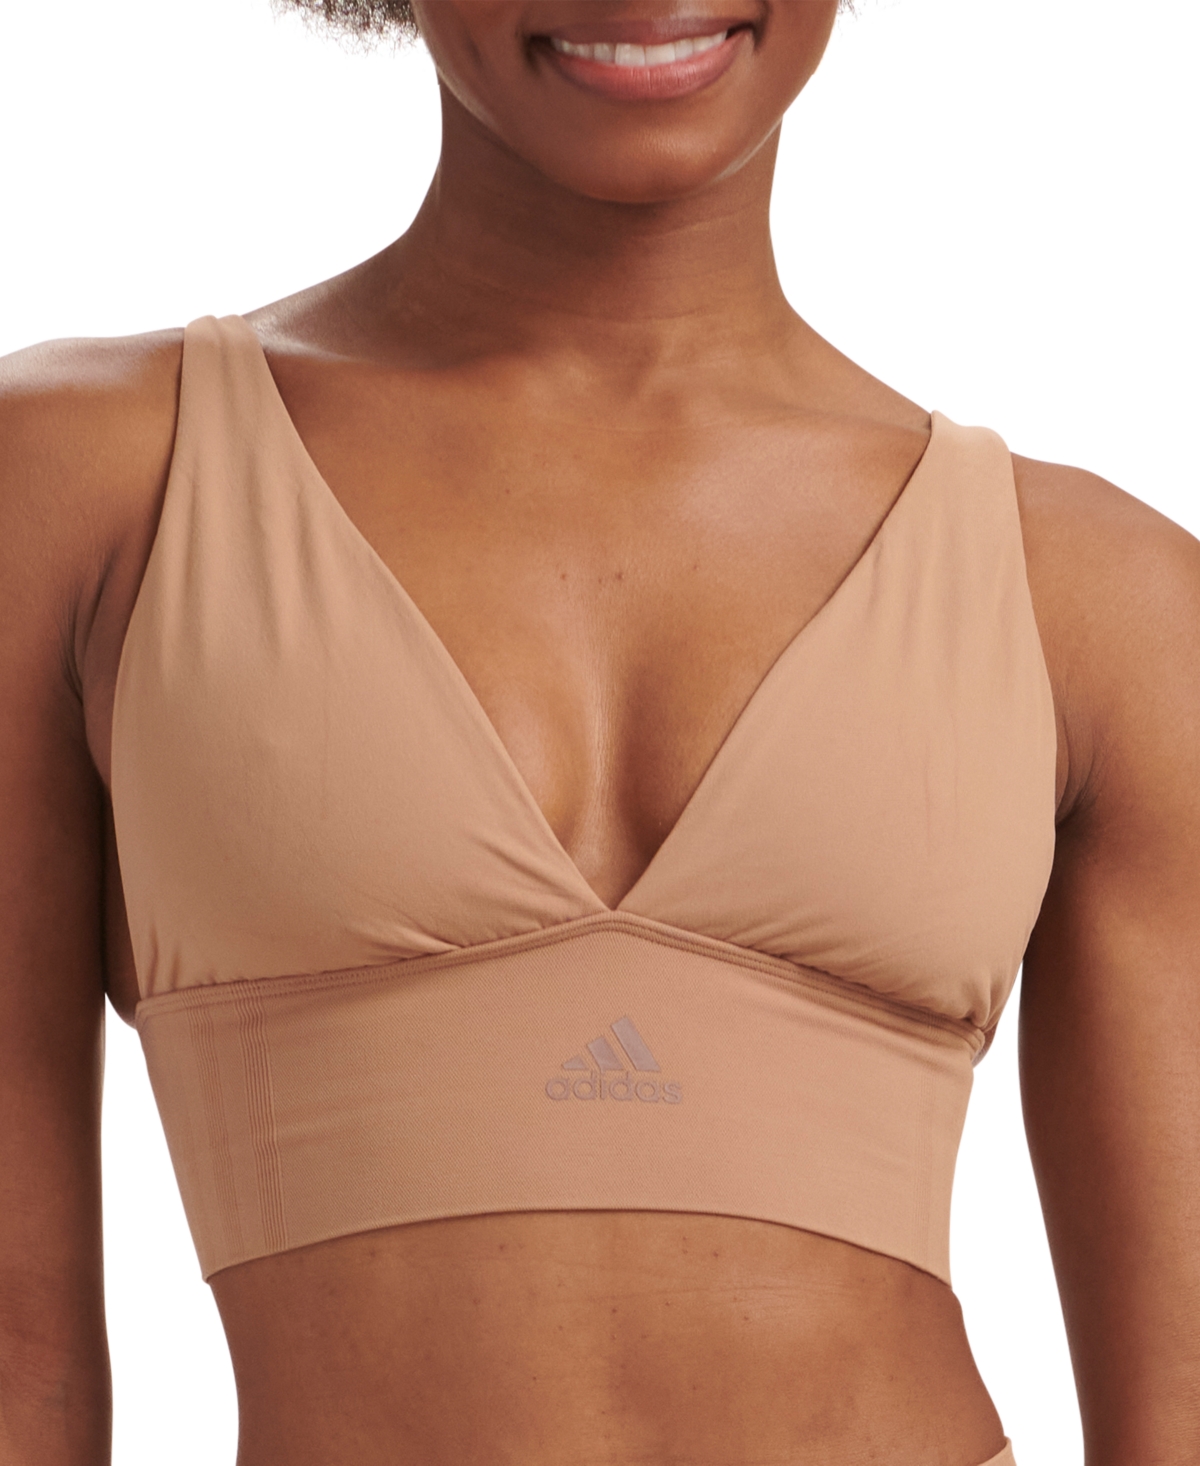 Shop Adidas Originals Intimates Women's Longline Plunge Light Support Bra 4a7h69 In Toasted Almond